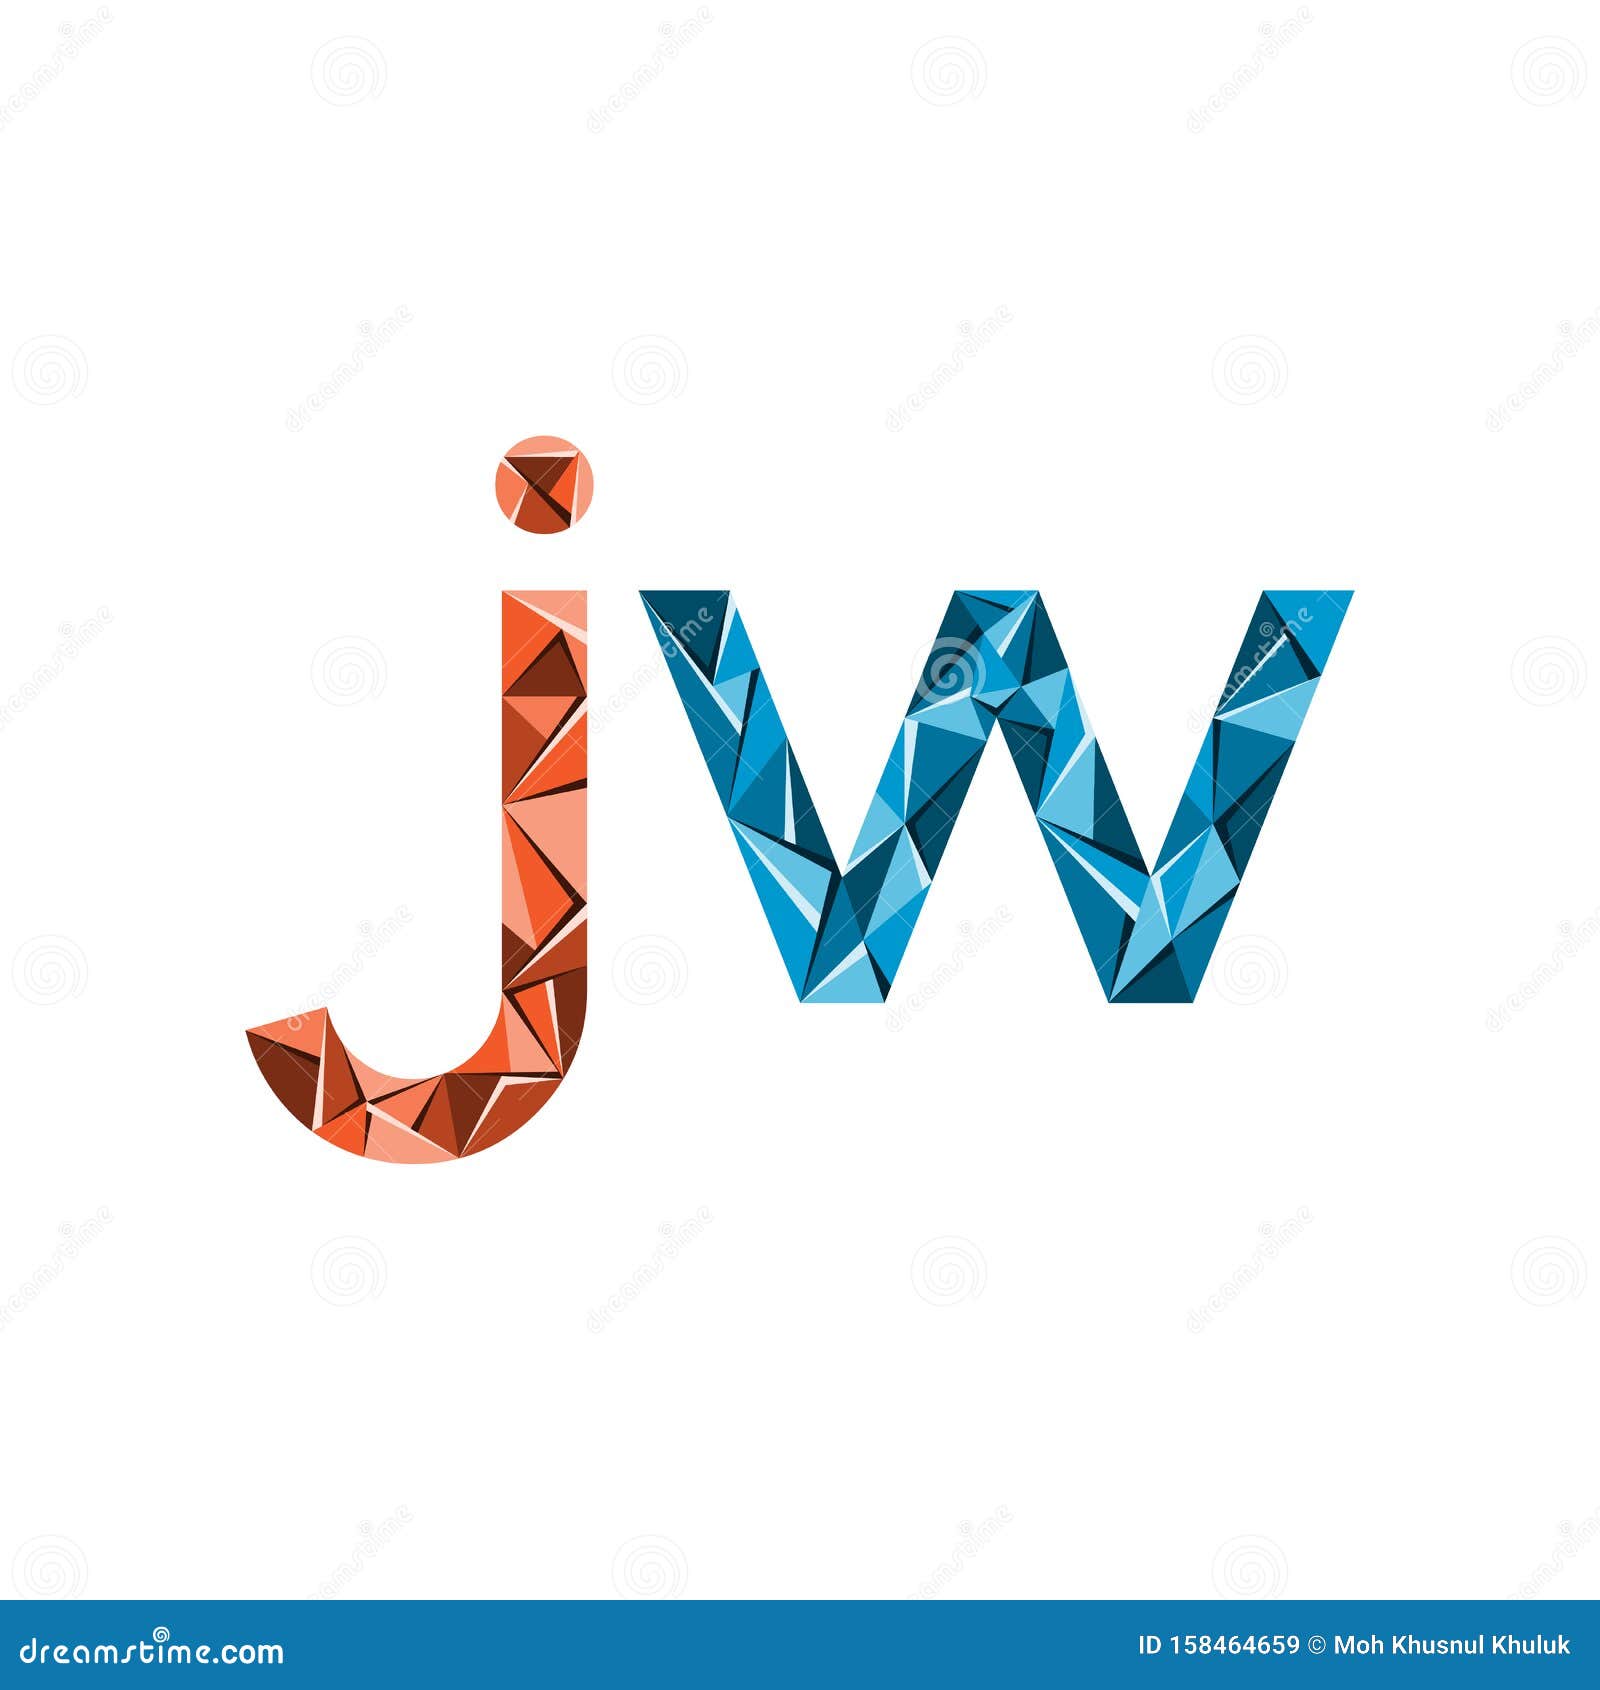 Initial Letter Jw Abstract Triangle Logo Vector Stock Vector ...